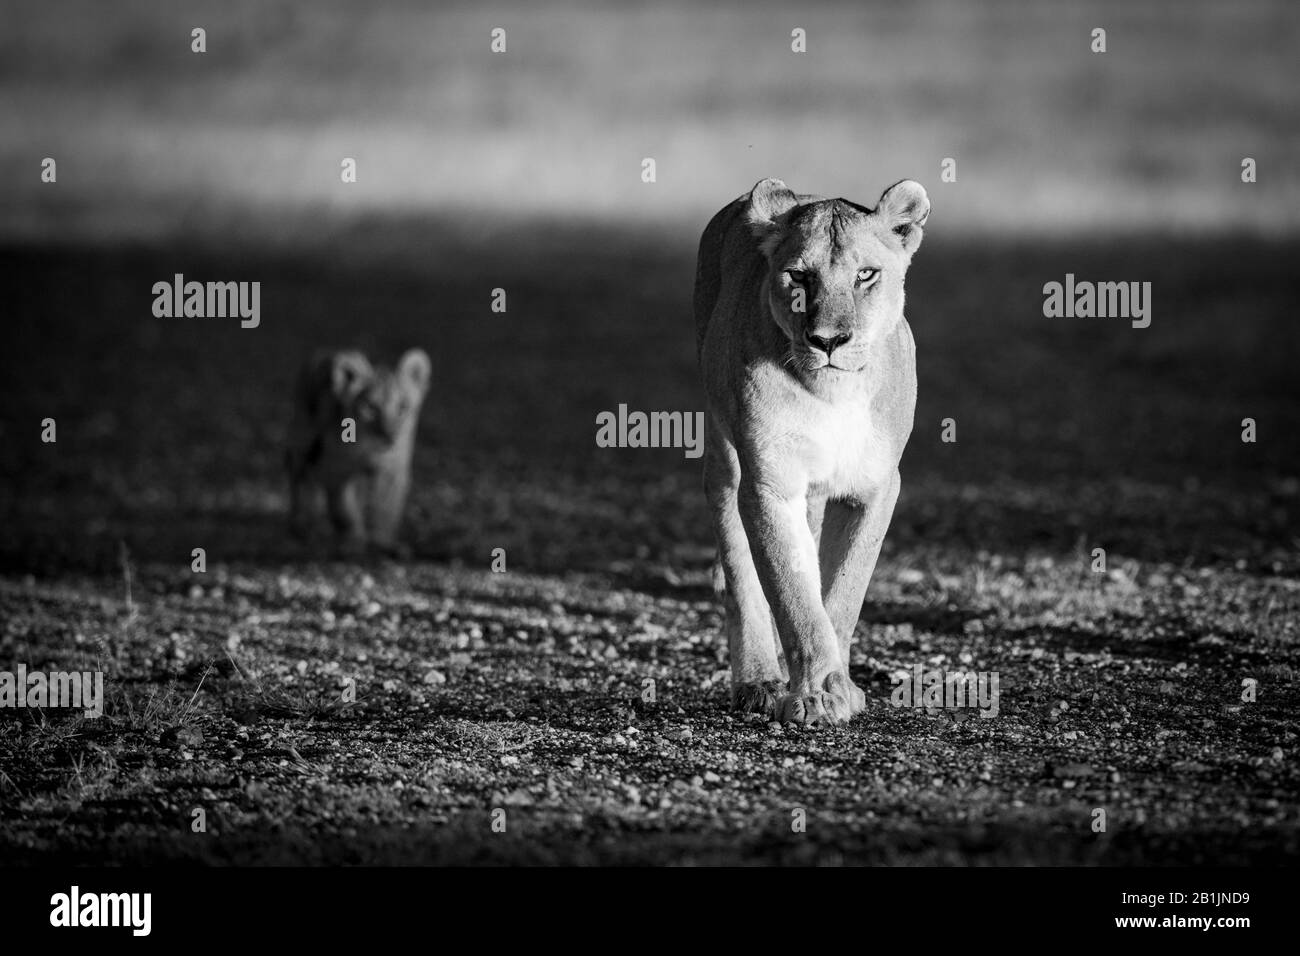 A lioness walks along a gravel airstrip at sunrise, followed by her young cub. They both have golden coats, made to glow in the warm early morning lig Stock Photo